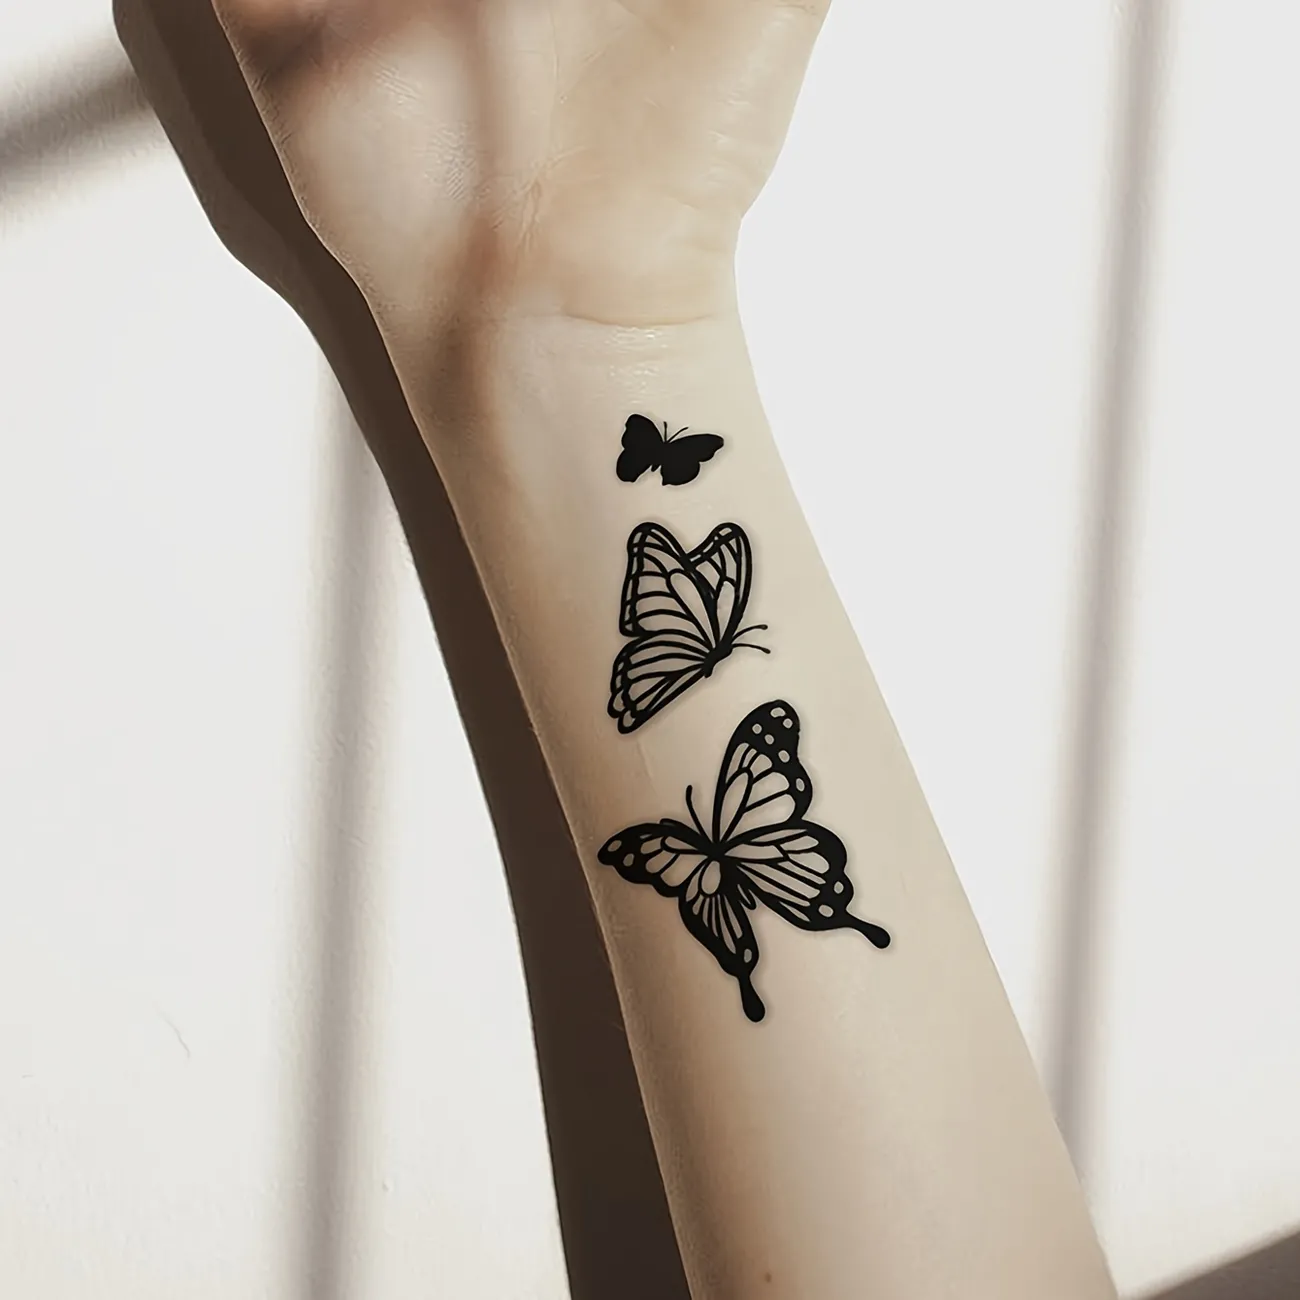 Black Butterfly Tattoo Meaning: The Intricate Black Butterfly Tattoo Design and Meaning